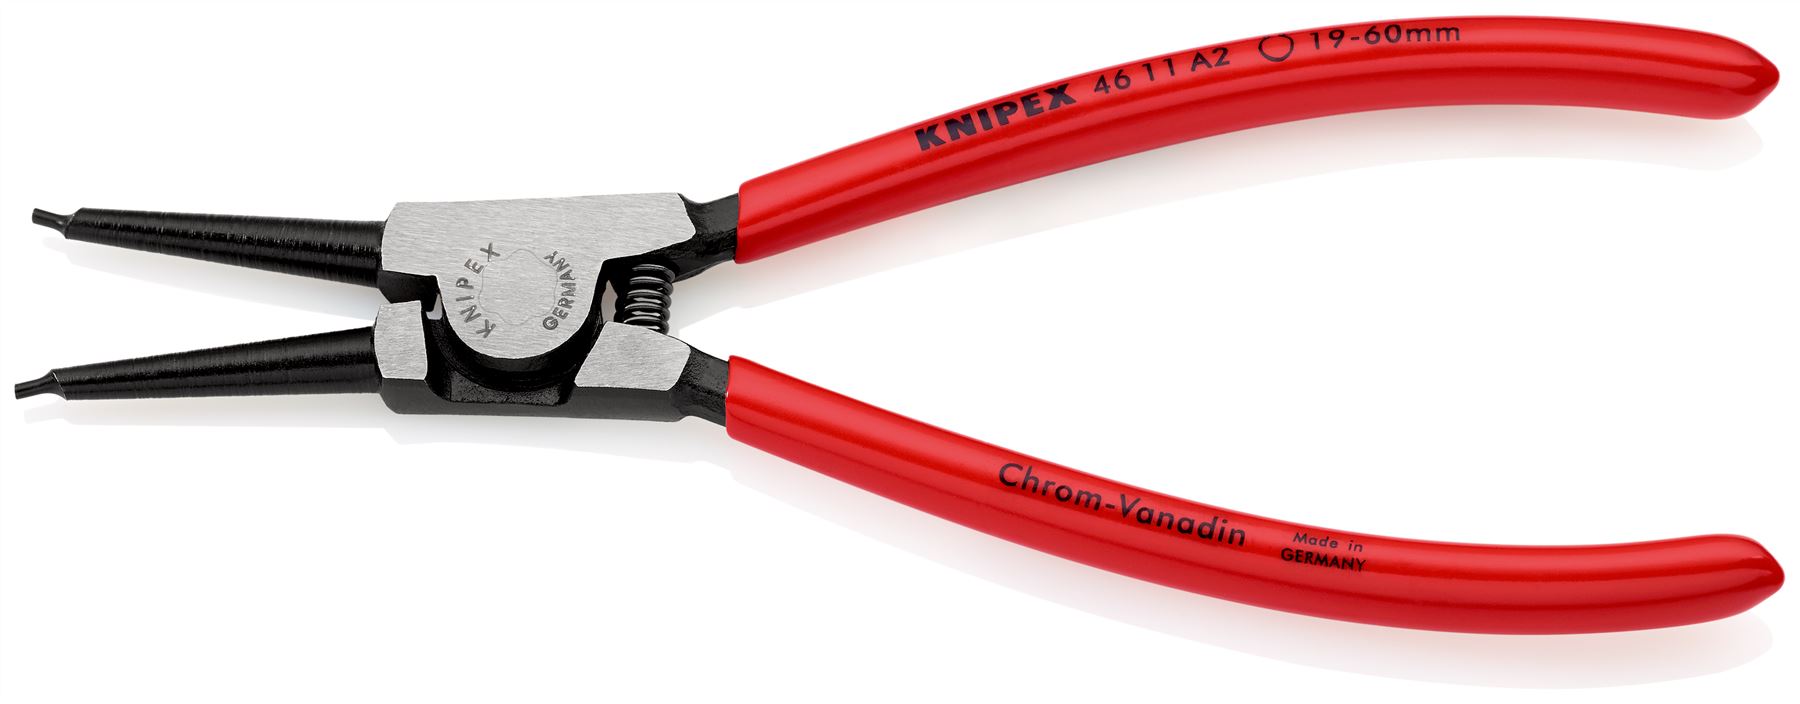 KNIPEX Circlip Pliers for External Circlips on Shafts 180mm 1.8mm Diameter Tips 46 11 A2